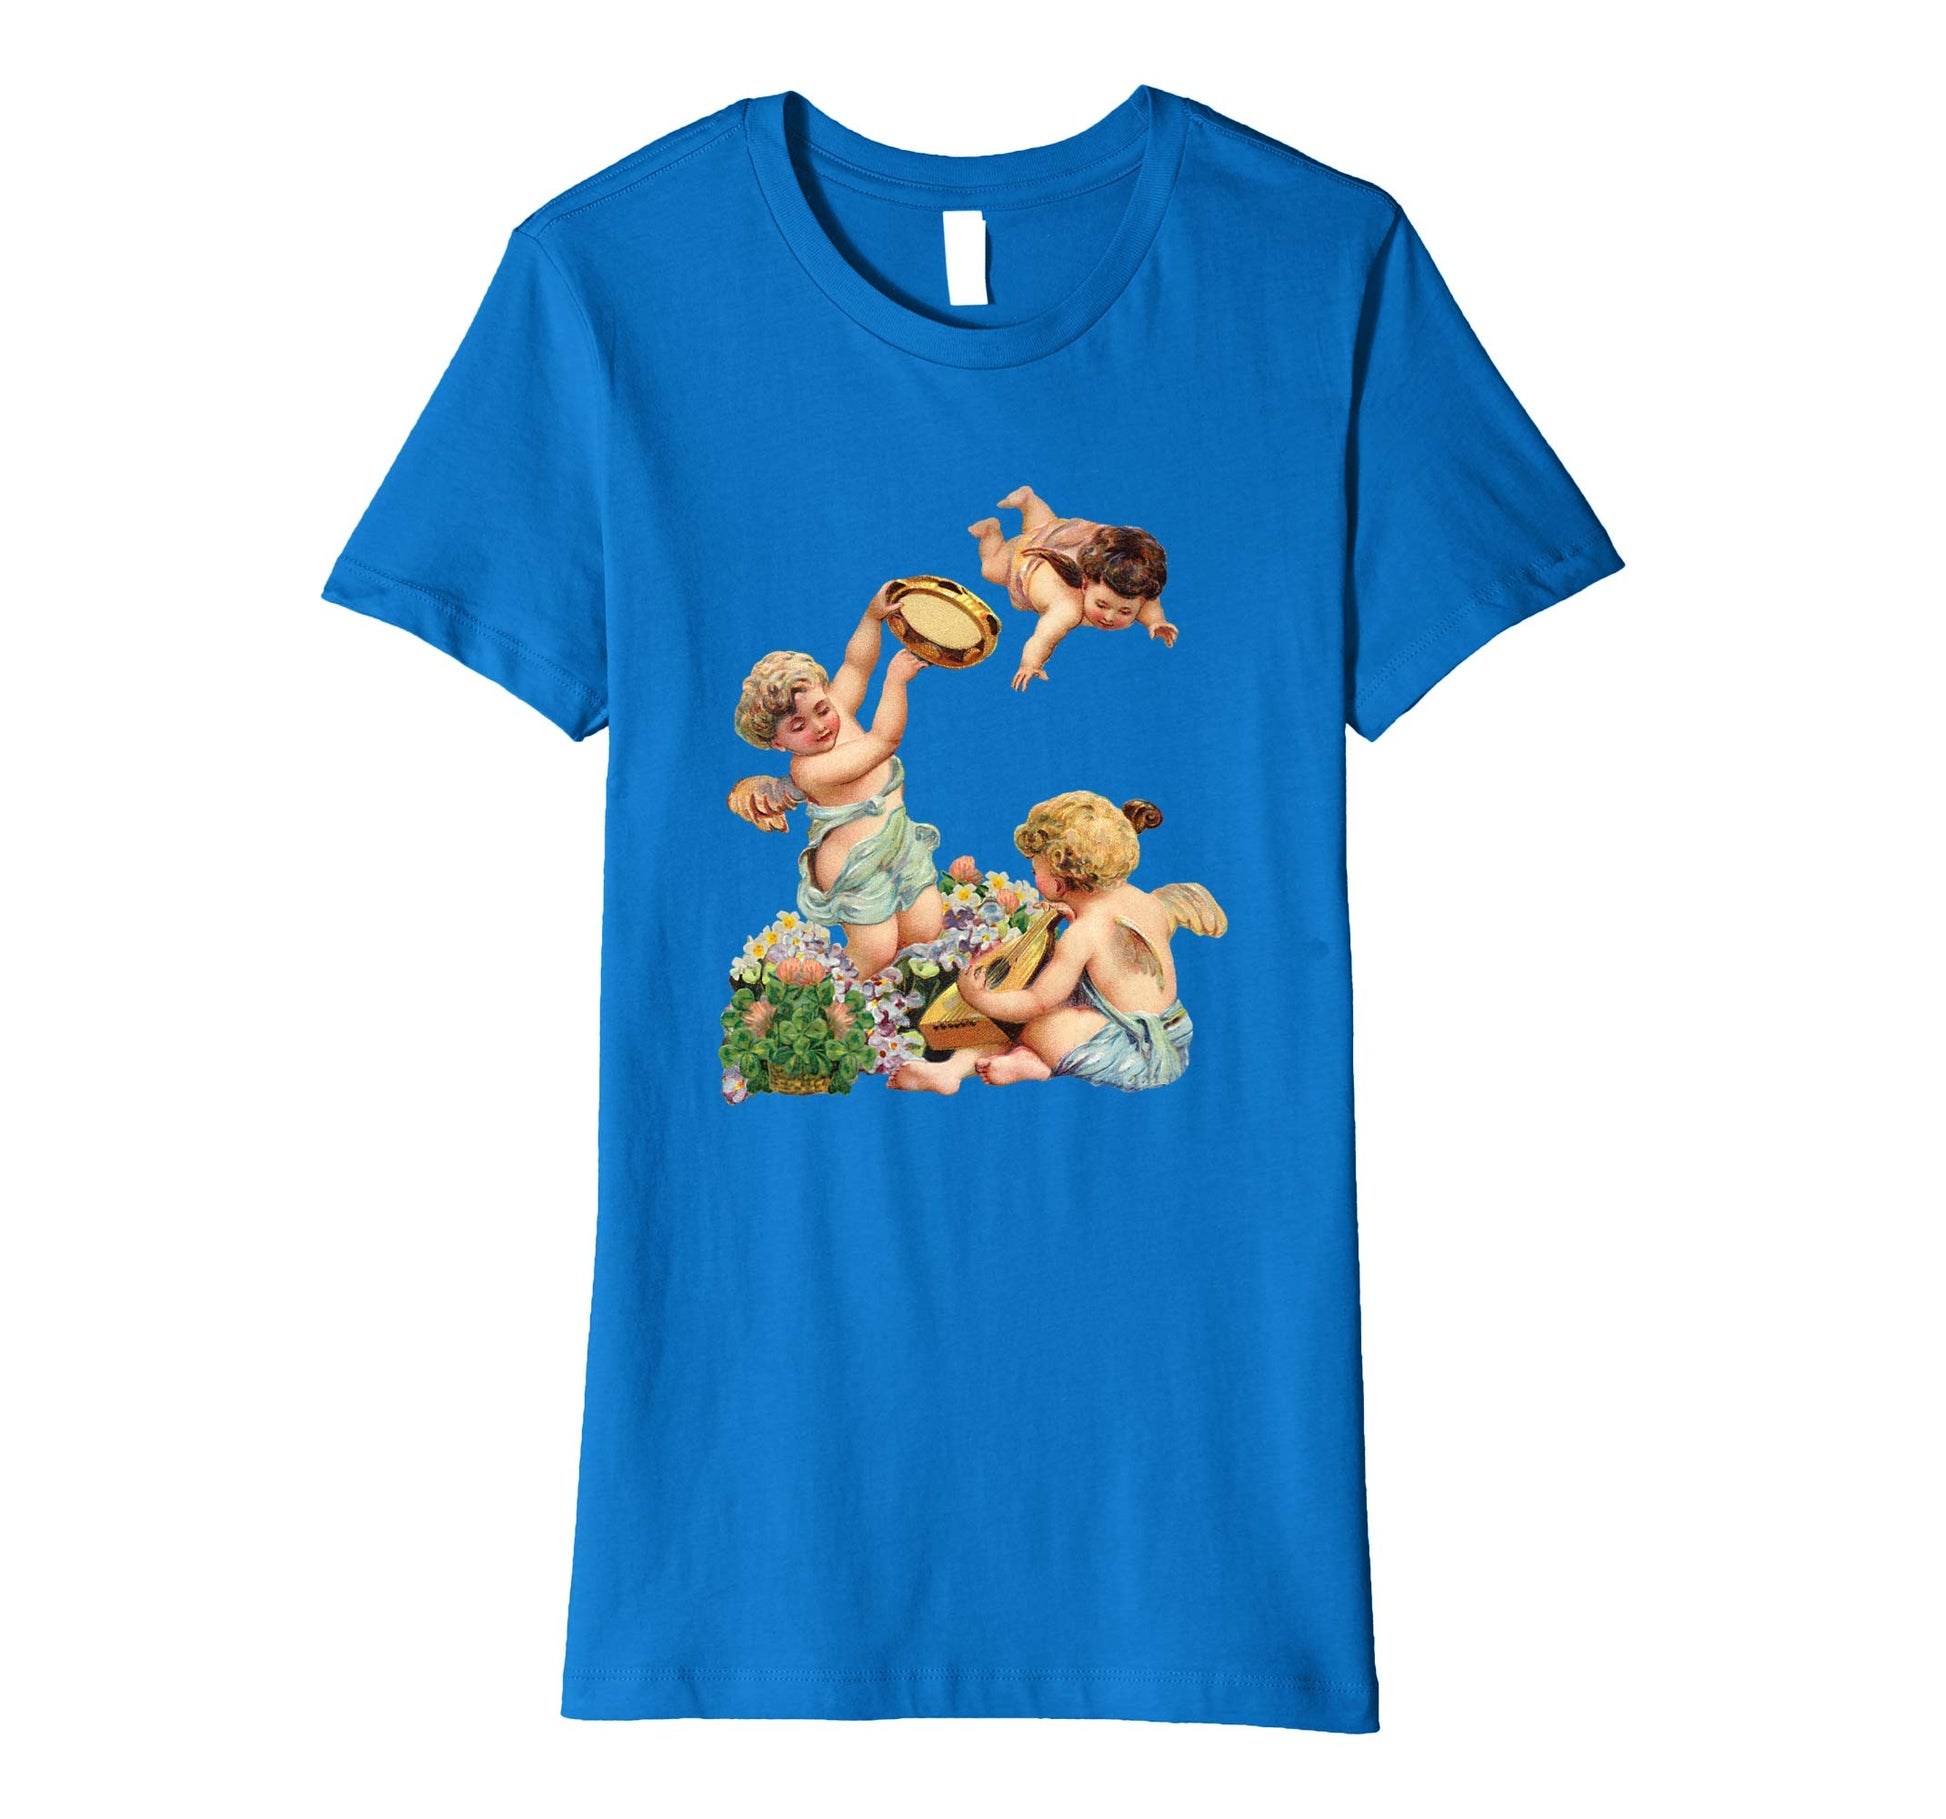 Womens Cotton Tee T-shirt Gift for Mom with Cherubs Playing Music Art Royal Blue